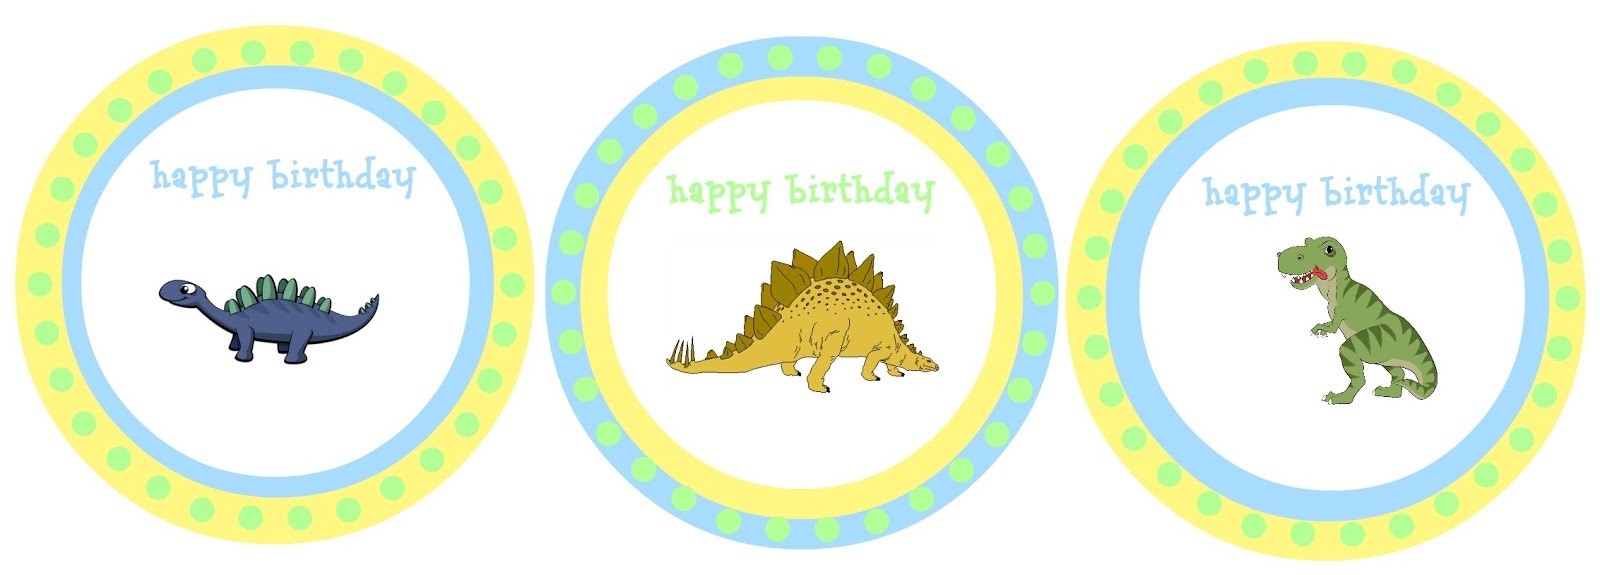 Party With Dinosaurs - Dinosaur Themed Birthday Party - Free Printable Dinosaur Labels